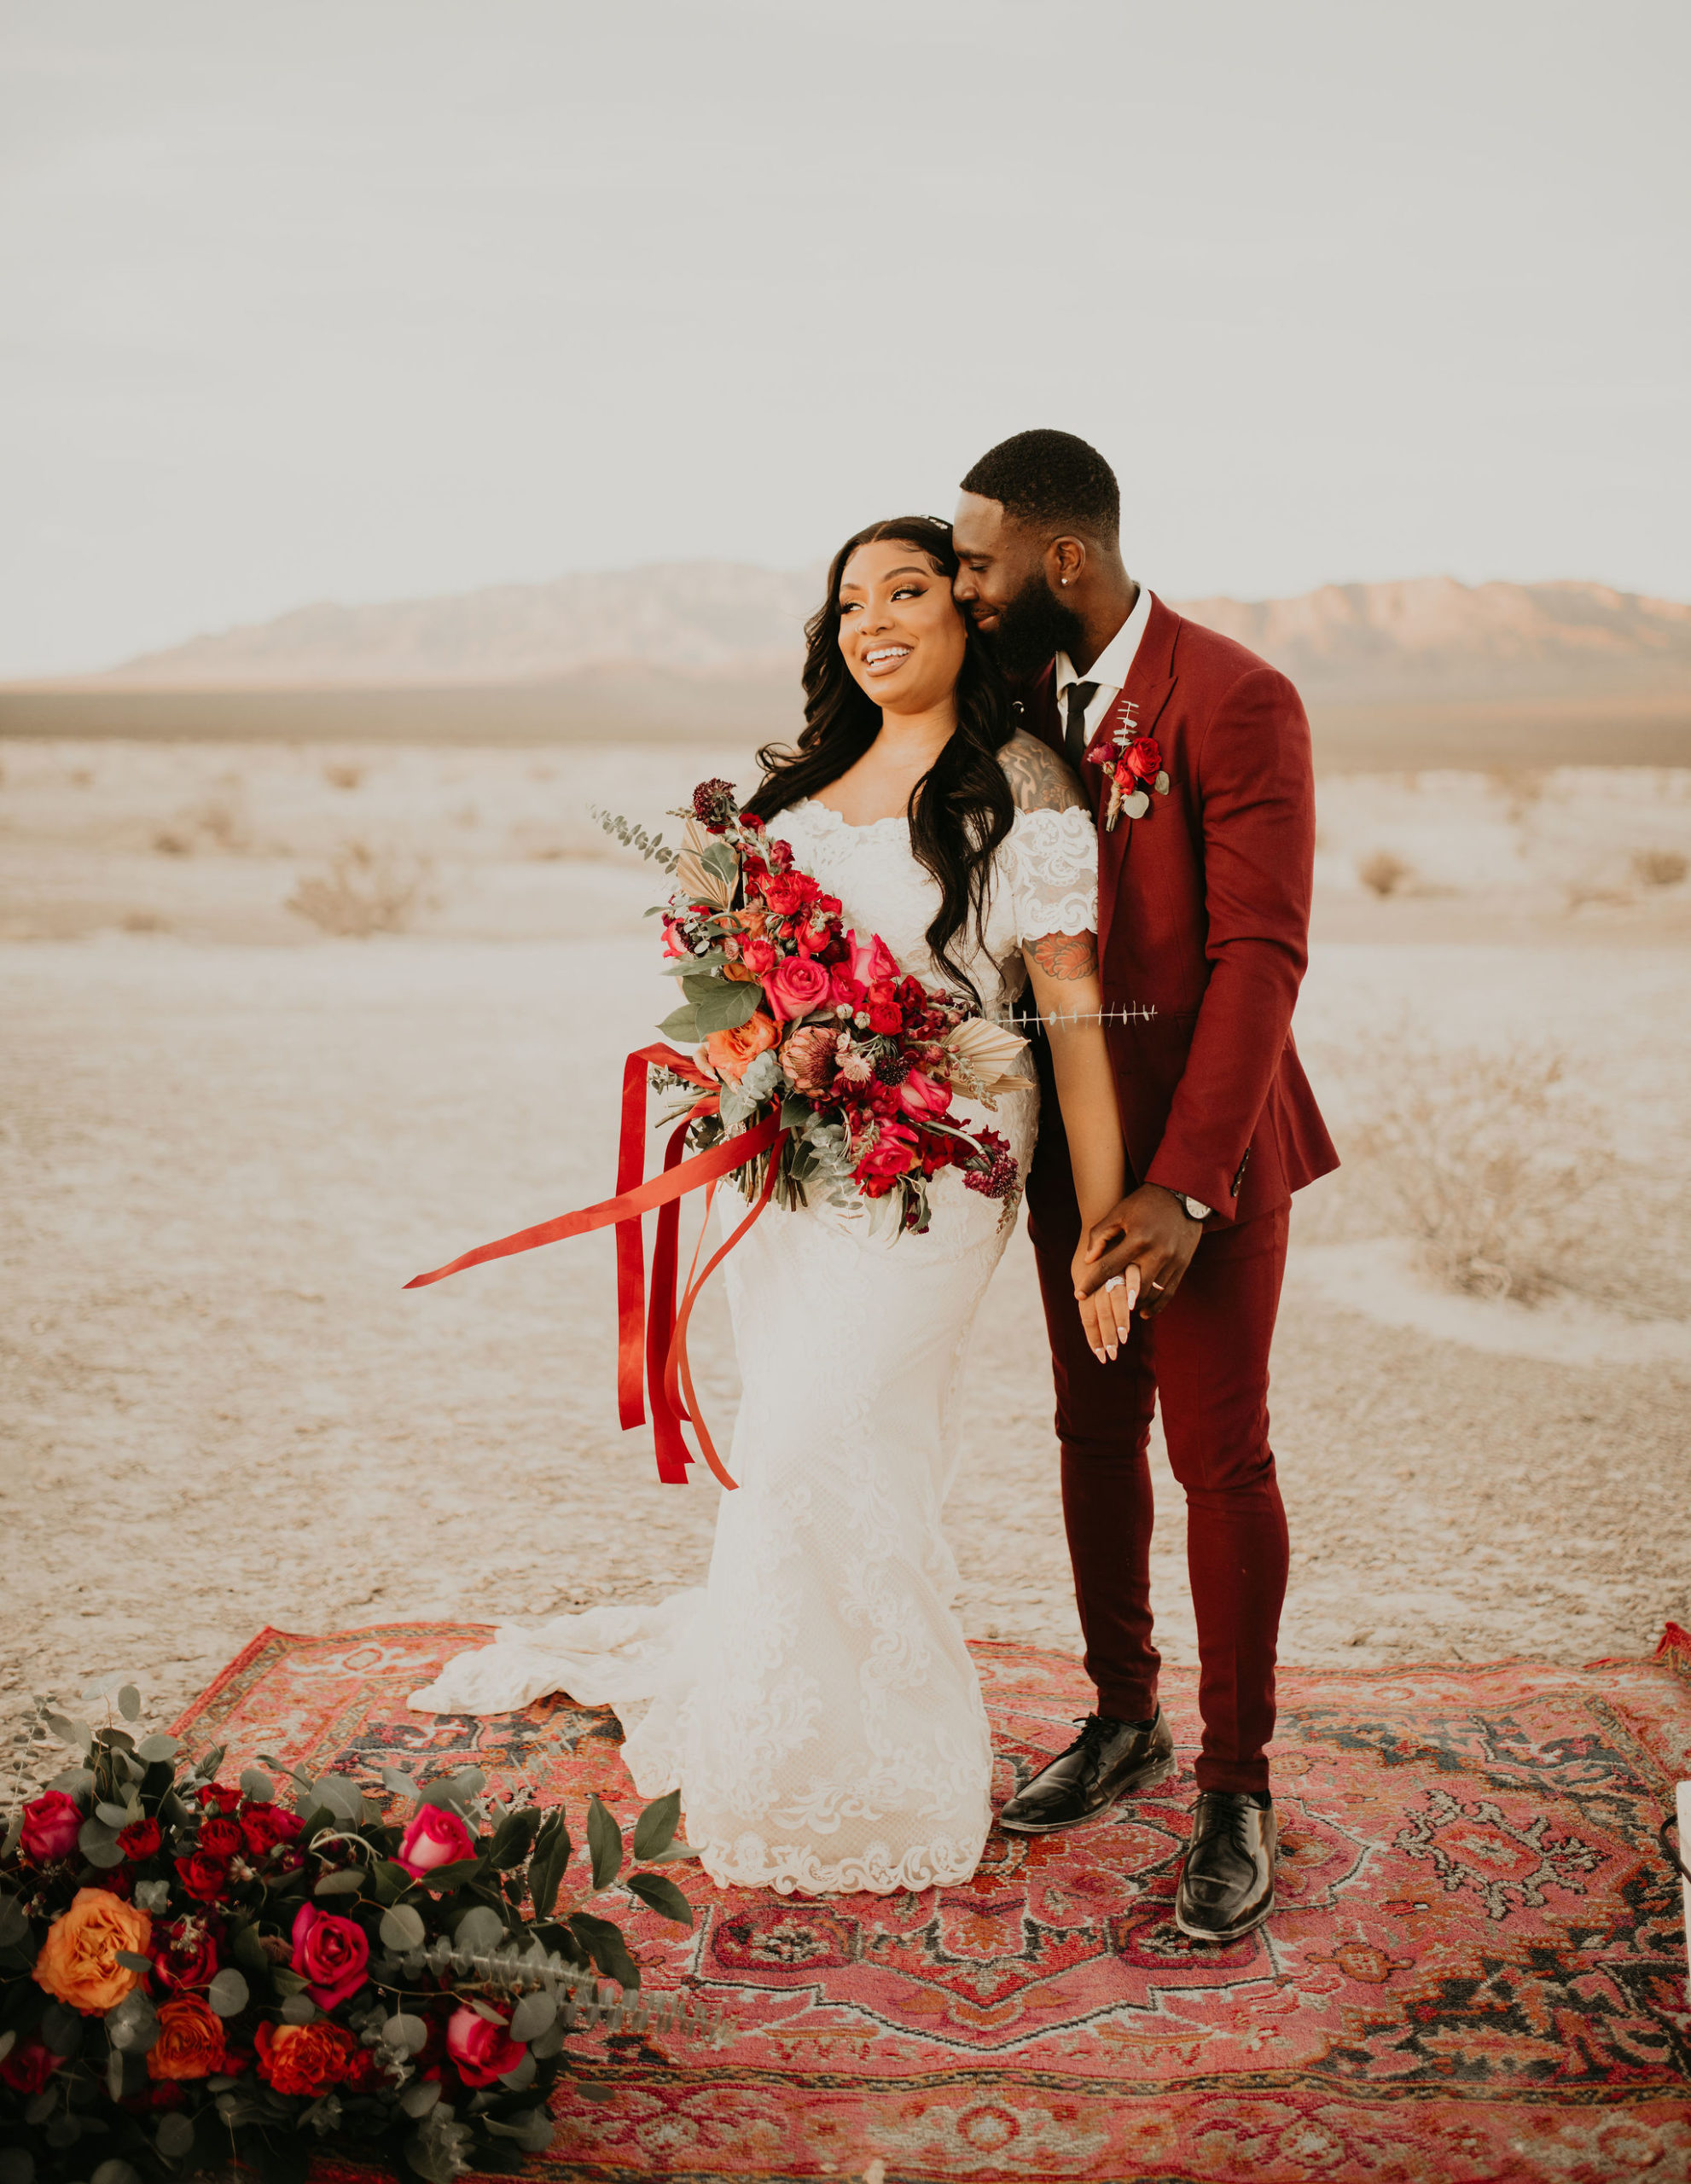 Newlyweds on Rug with Ground Florals in Jewel Tone Las Vegas Elopement